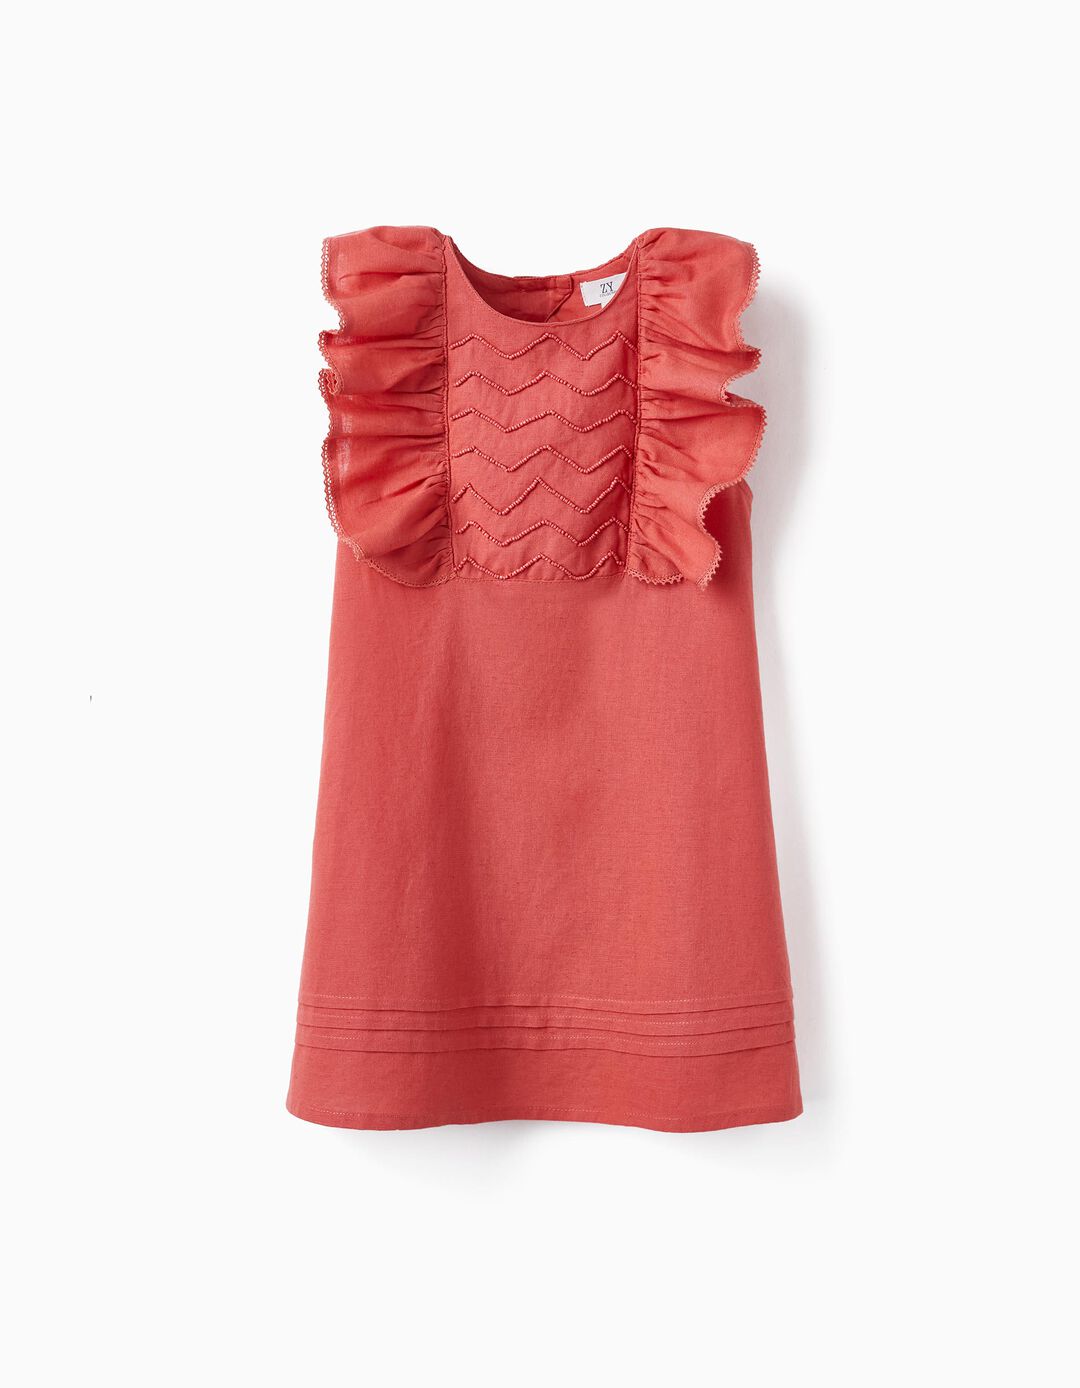 Linen and Cotton Dress with Beads for Girls, Dark Pink